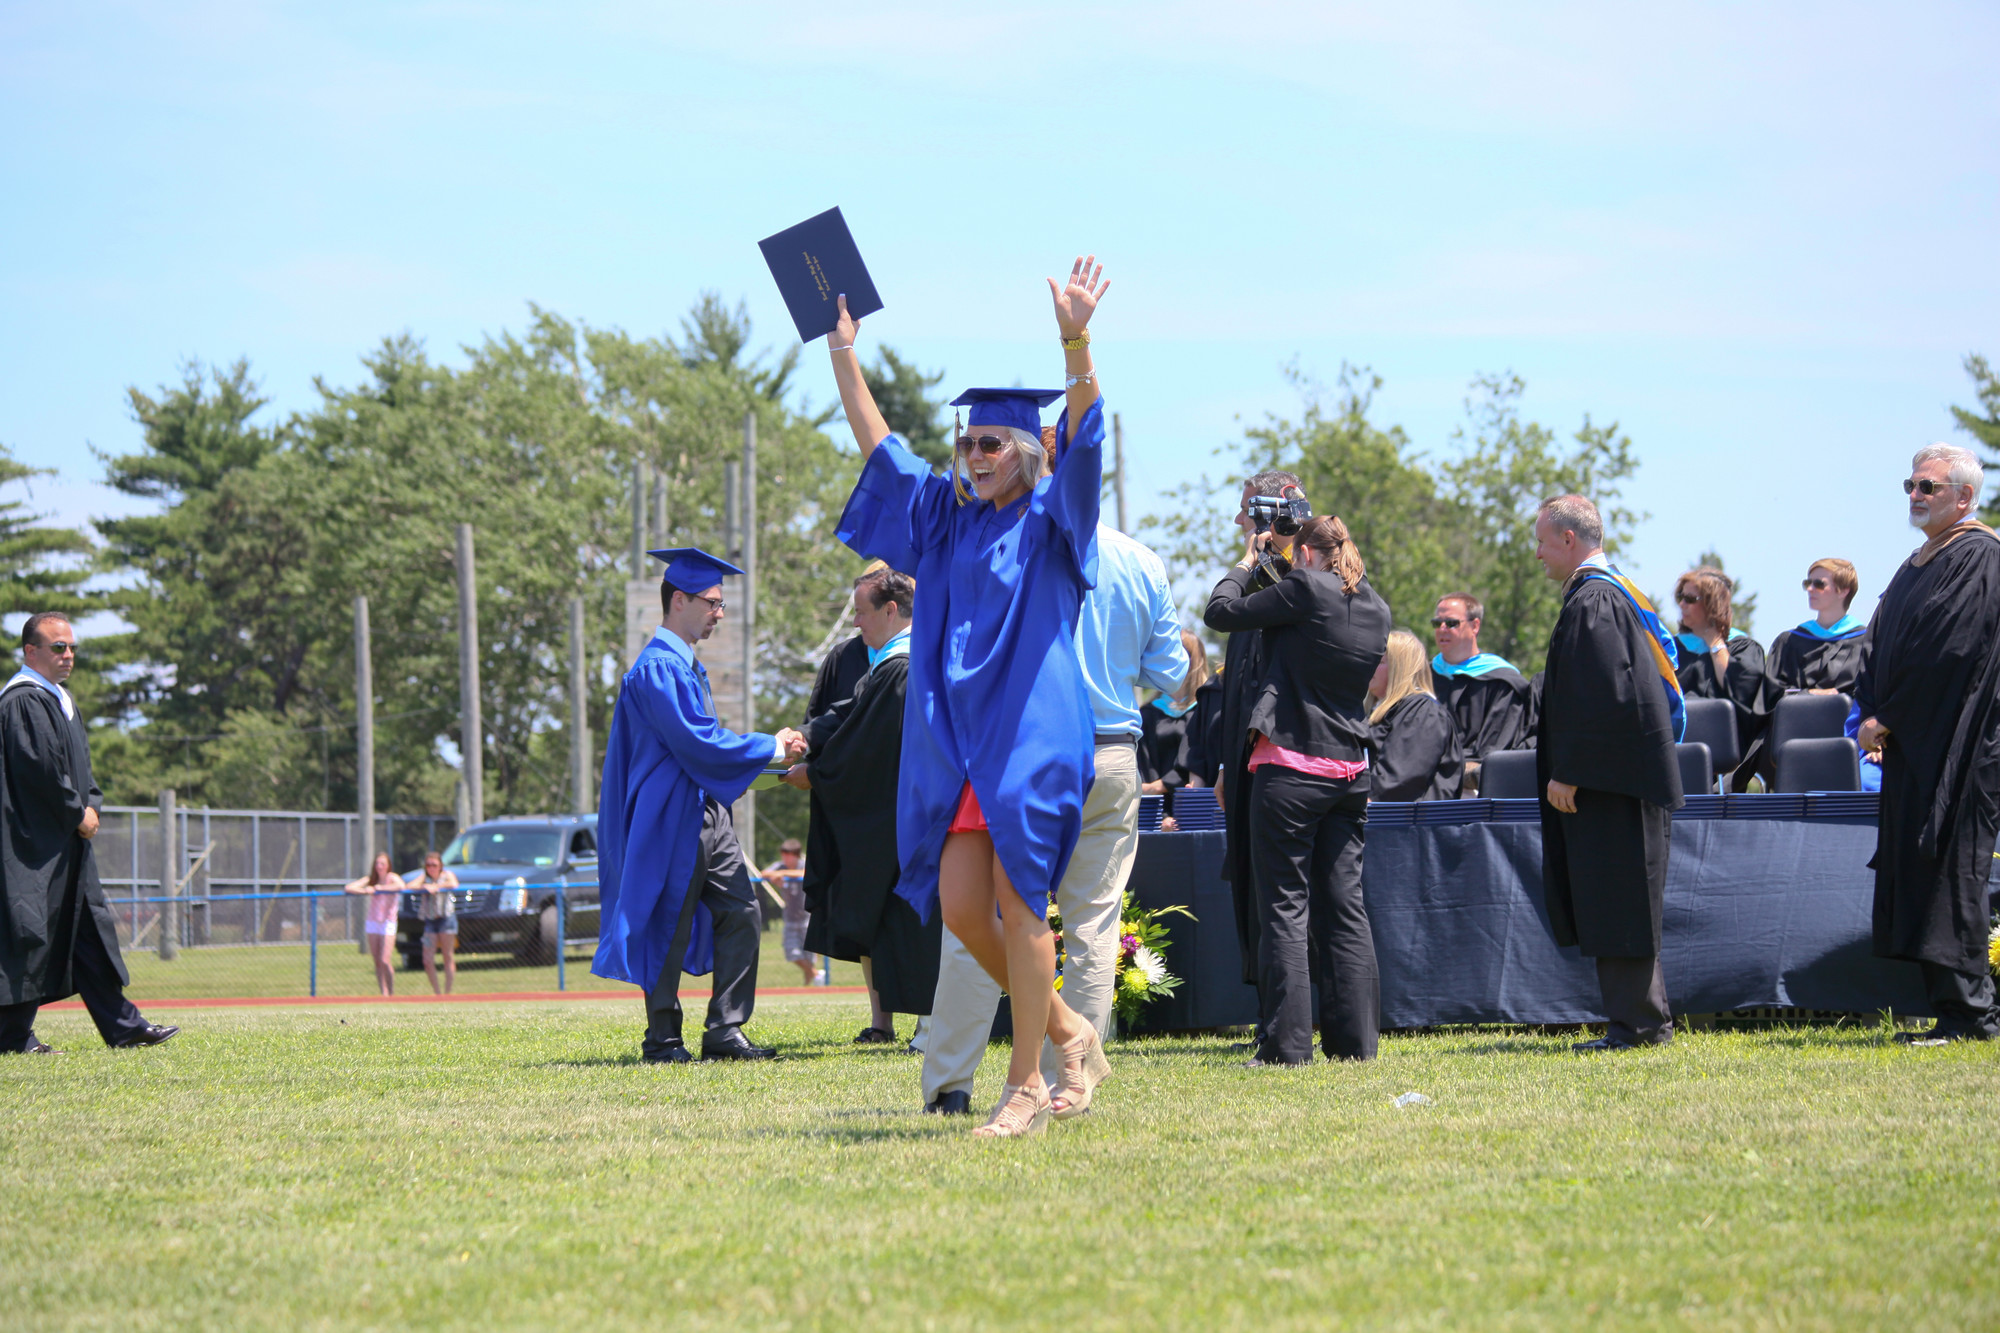 Students expressed their excitement after receiving their diplomas, like this young lady.